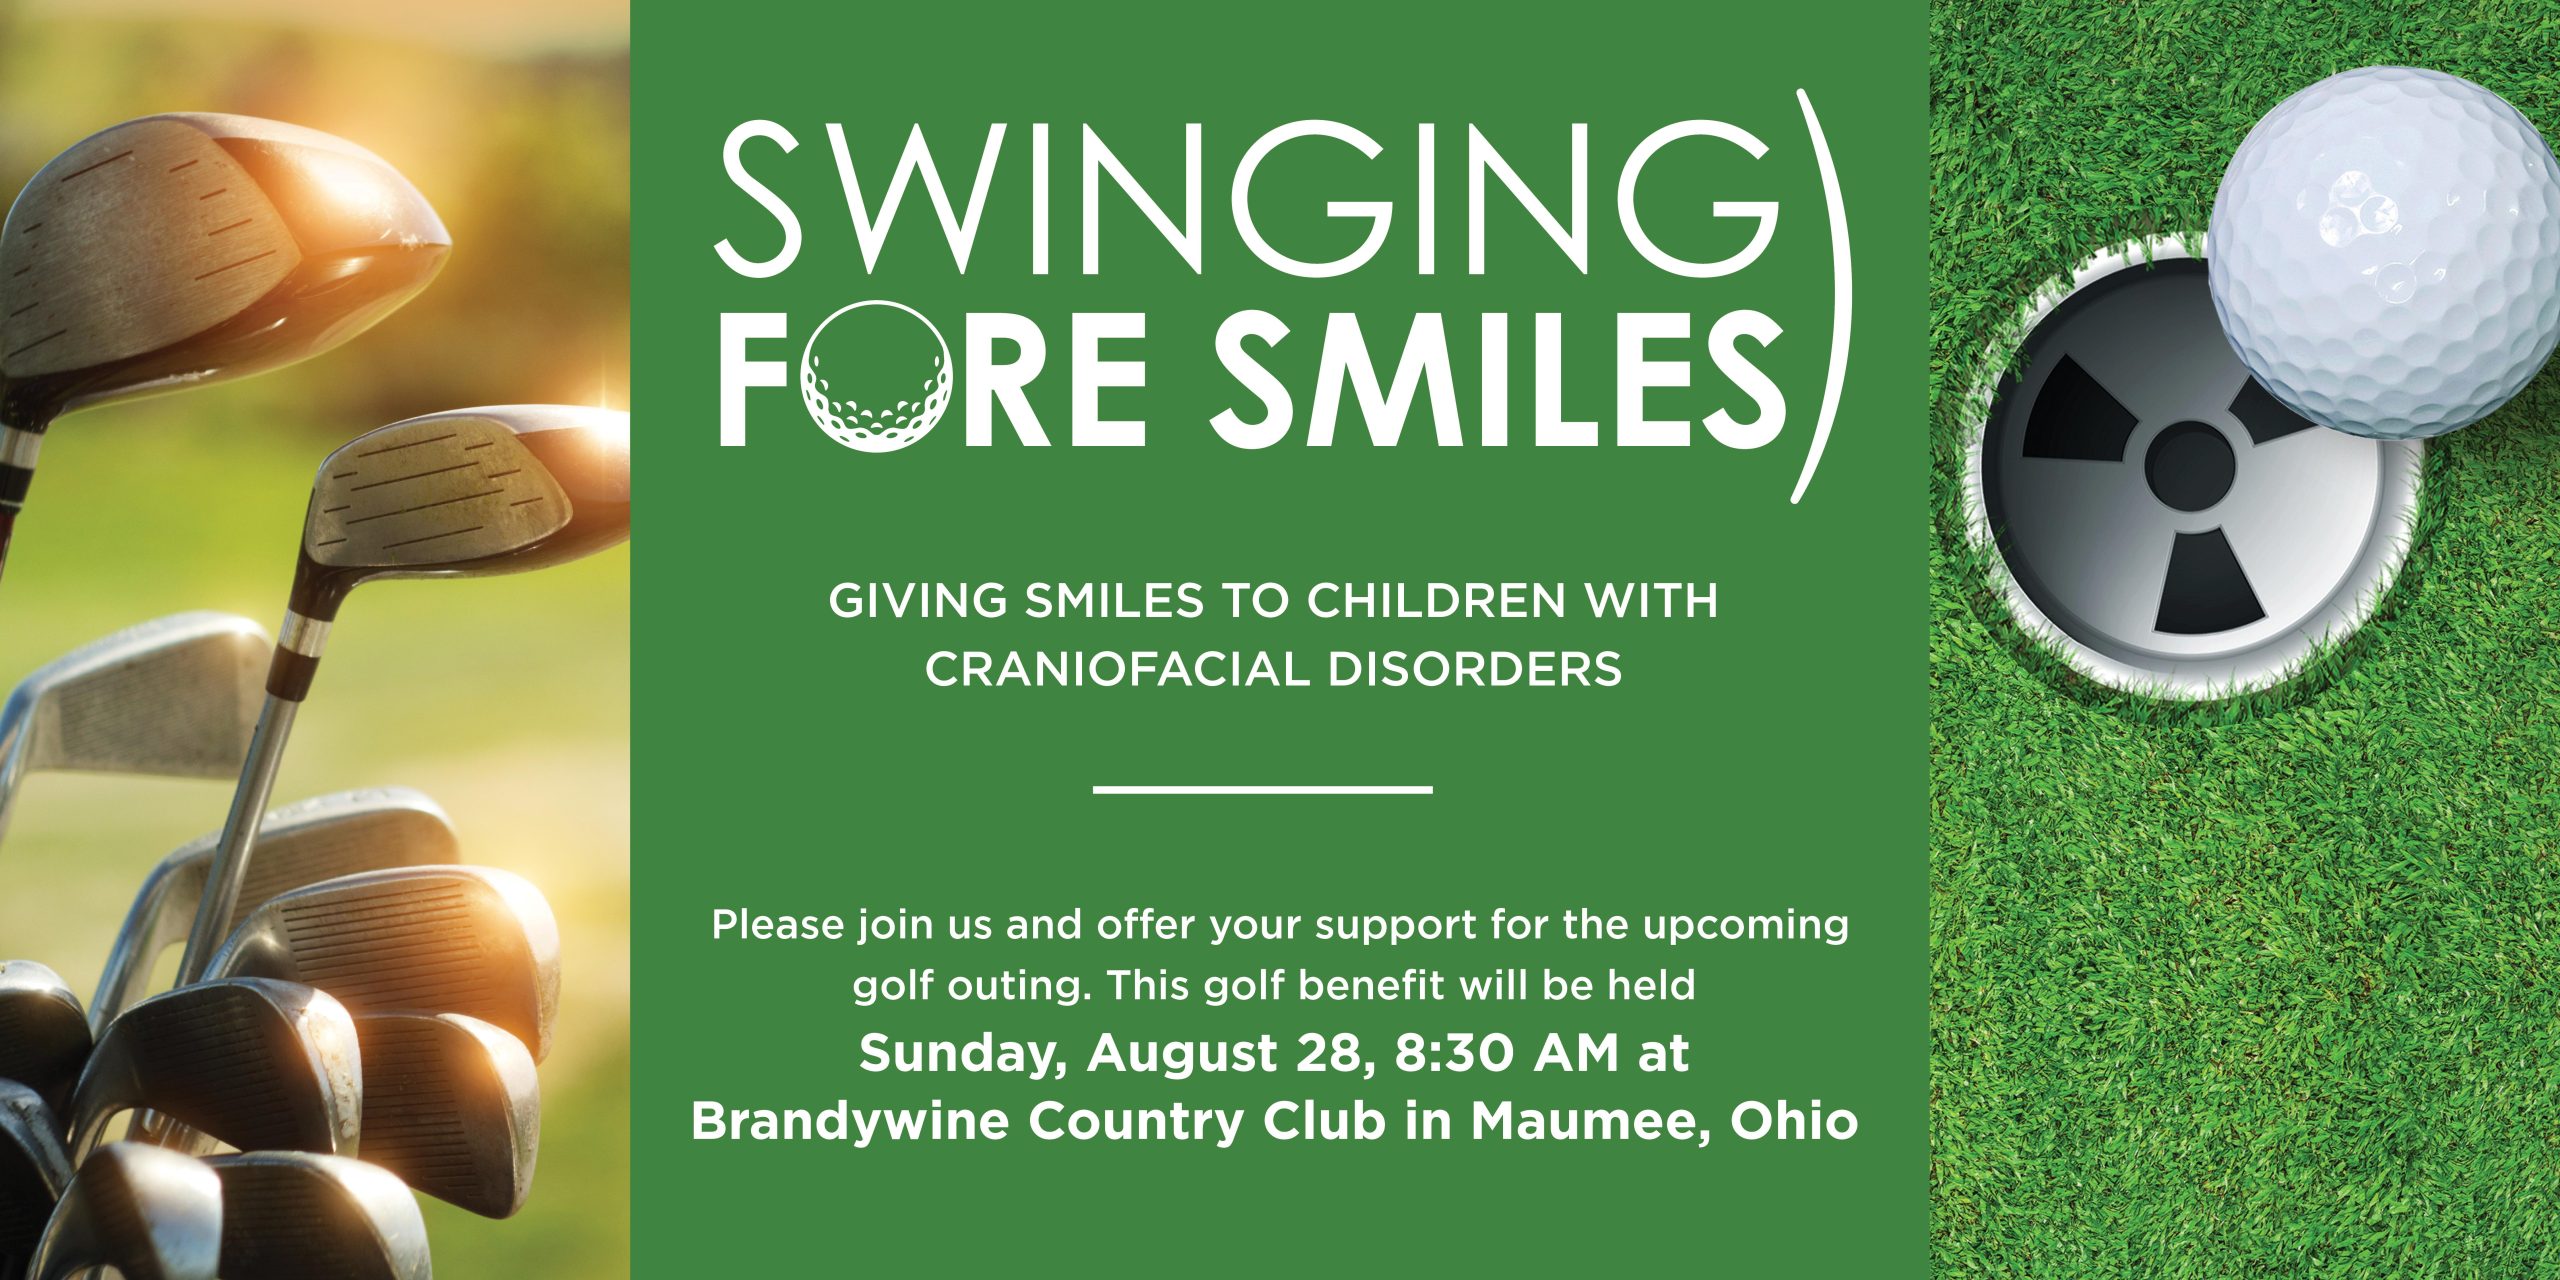 Swinging Fore Smiles - Charity Golf Outing